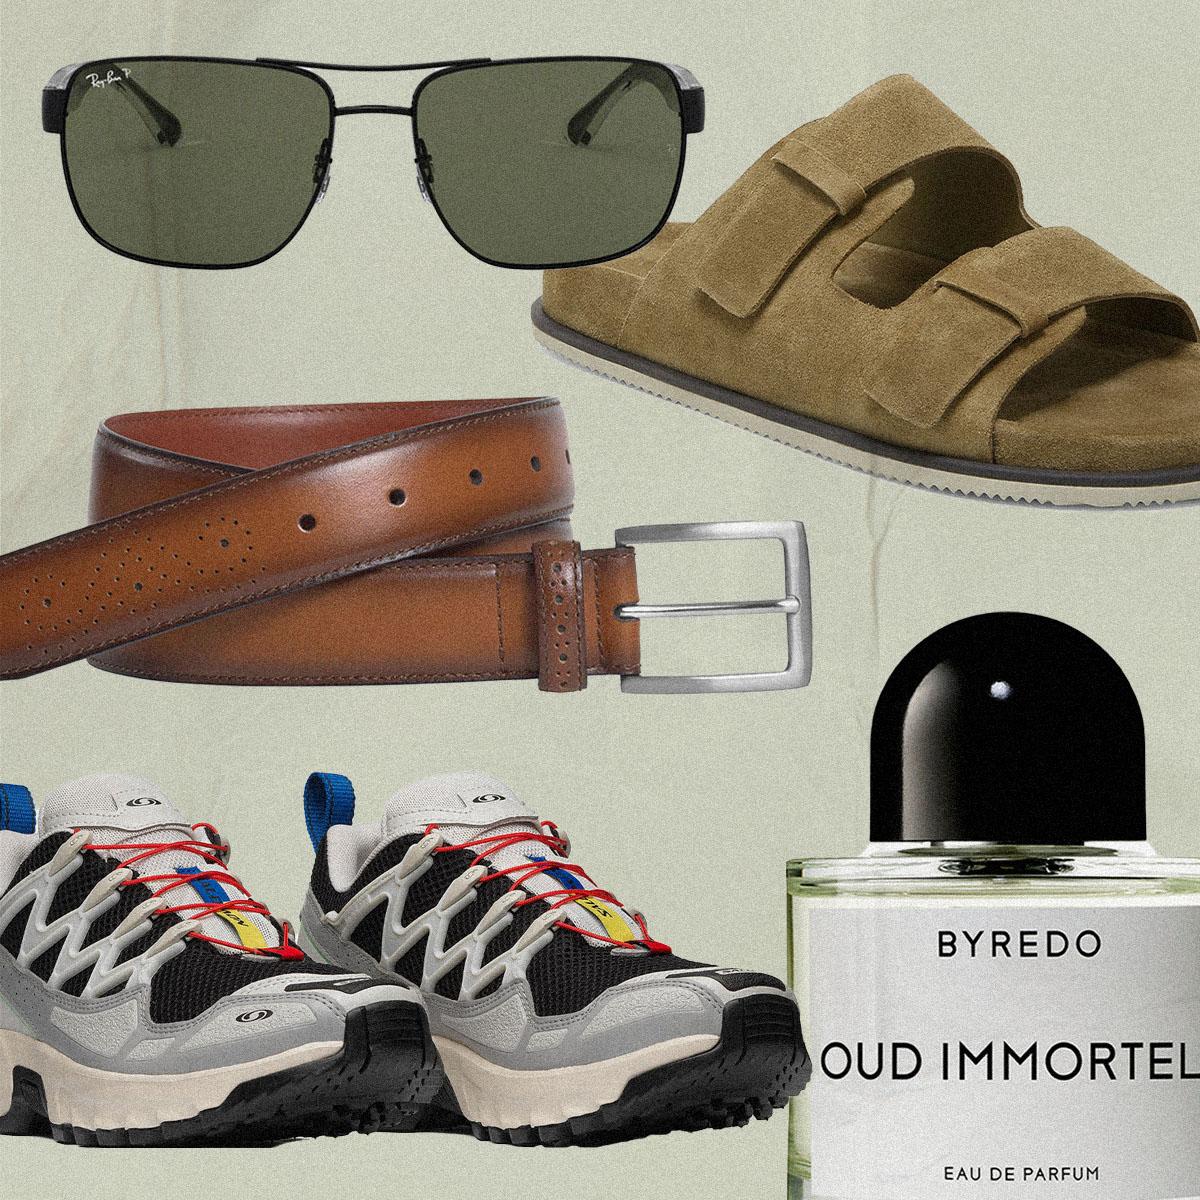 He’s Not a Regular Dad—He’s a Cool Dad Who Deserves These Nordstrom Gifts